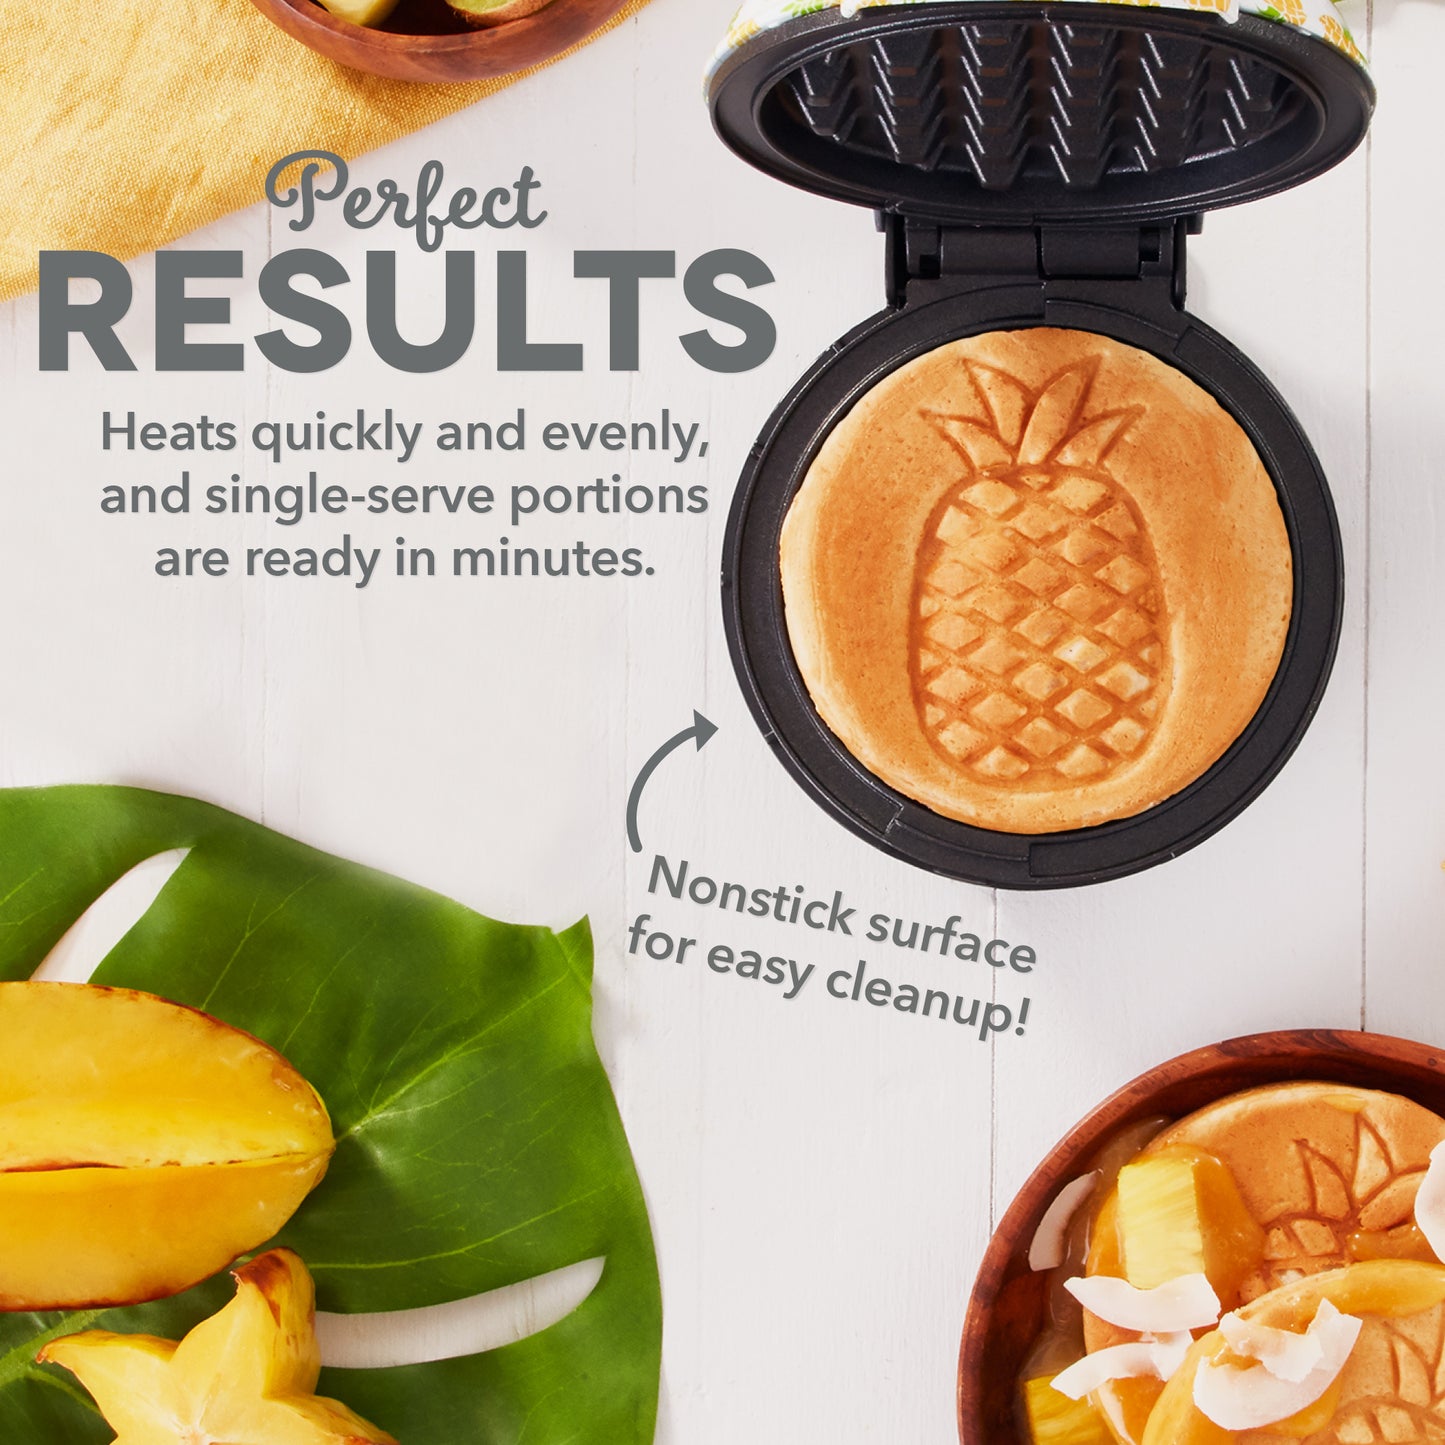 This Mini Waffle Maker Stamps a Pineapple on Your Breakfast for a Summery  Bite